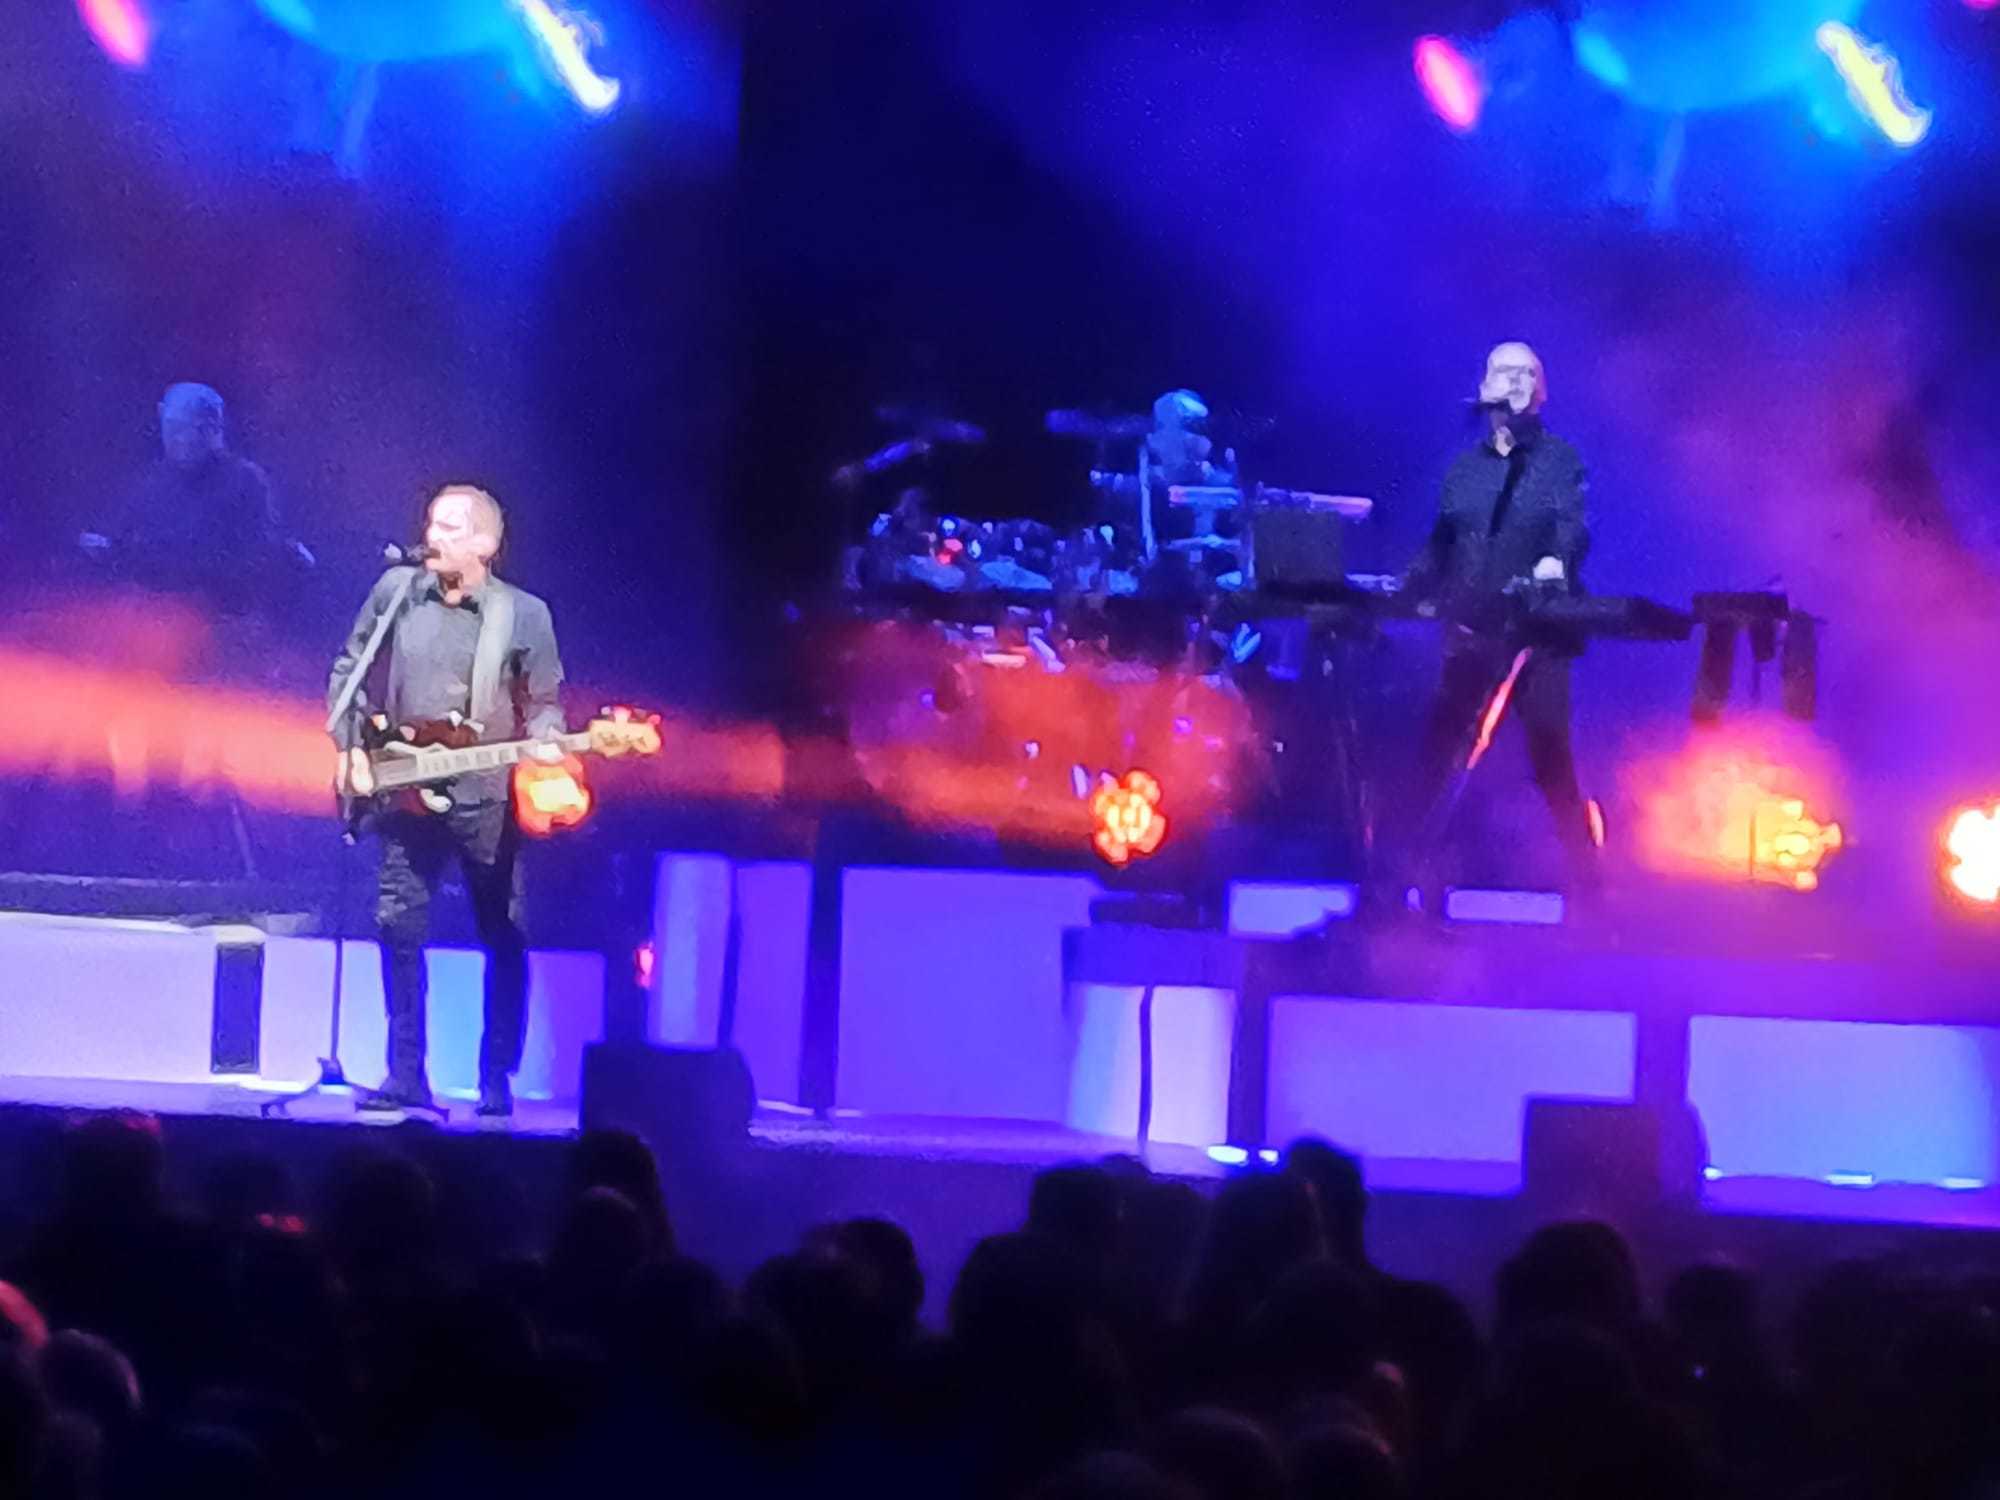 OMD performed at the M&S Bank Arena in Liverpool